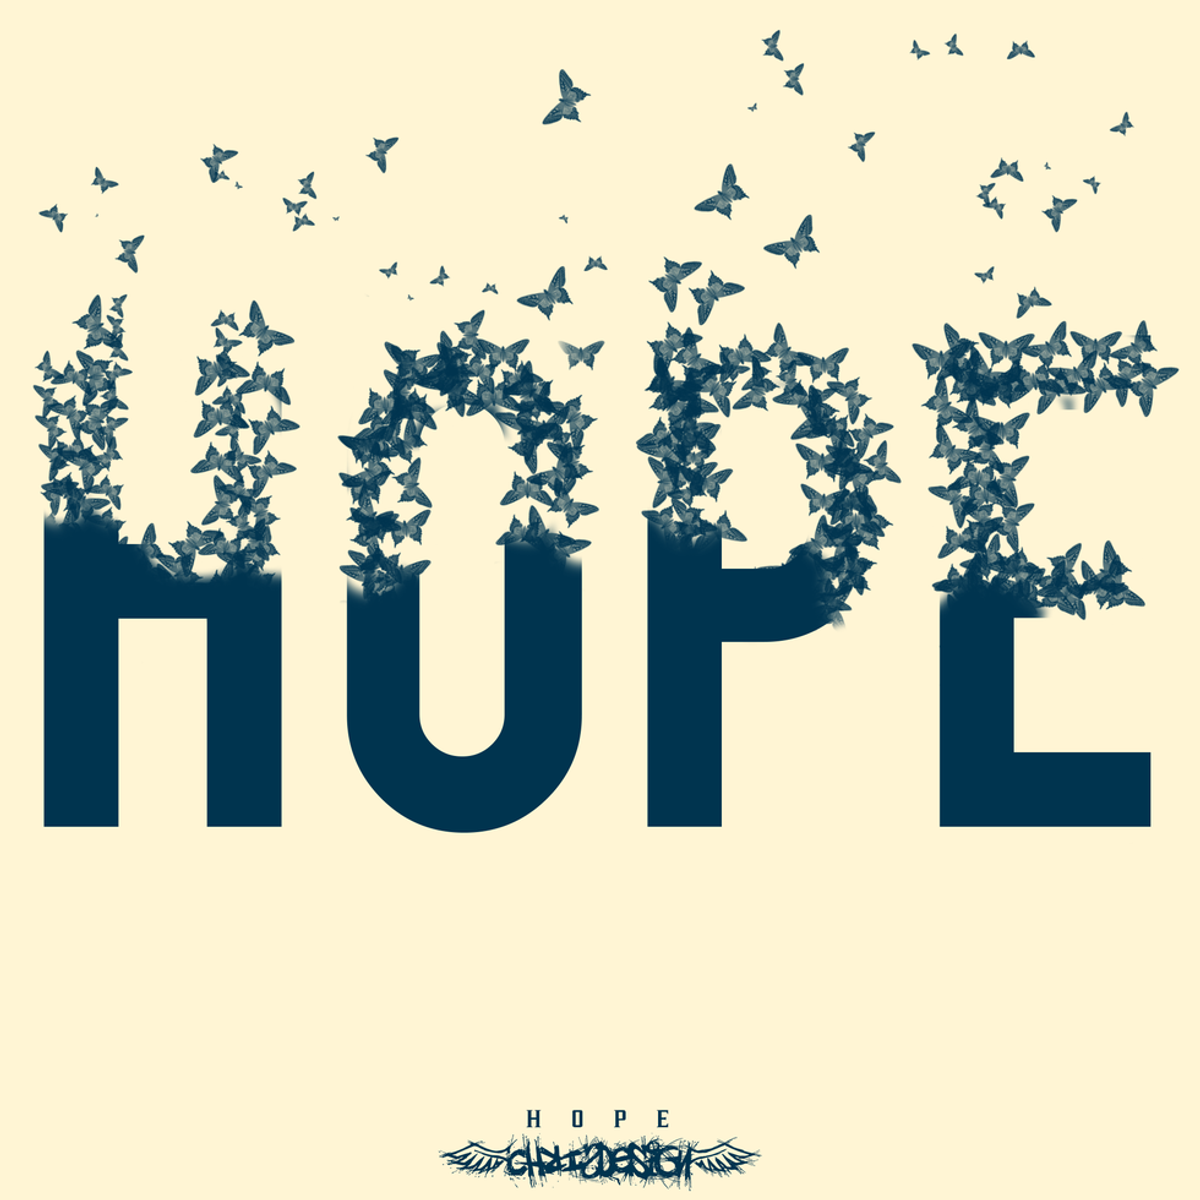 The Meaning Behind Hope